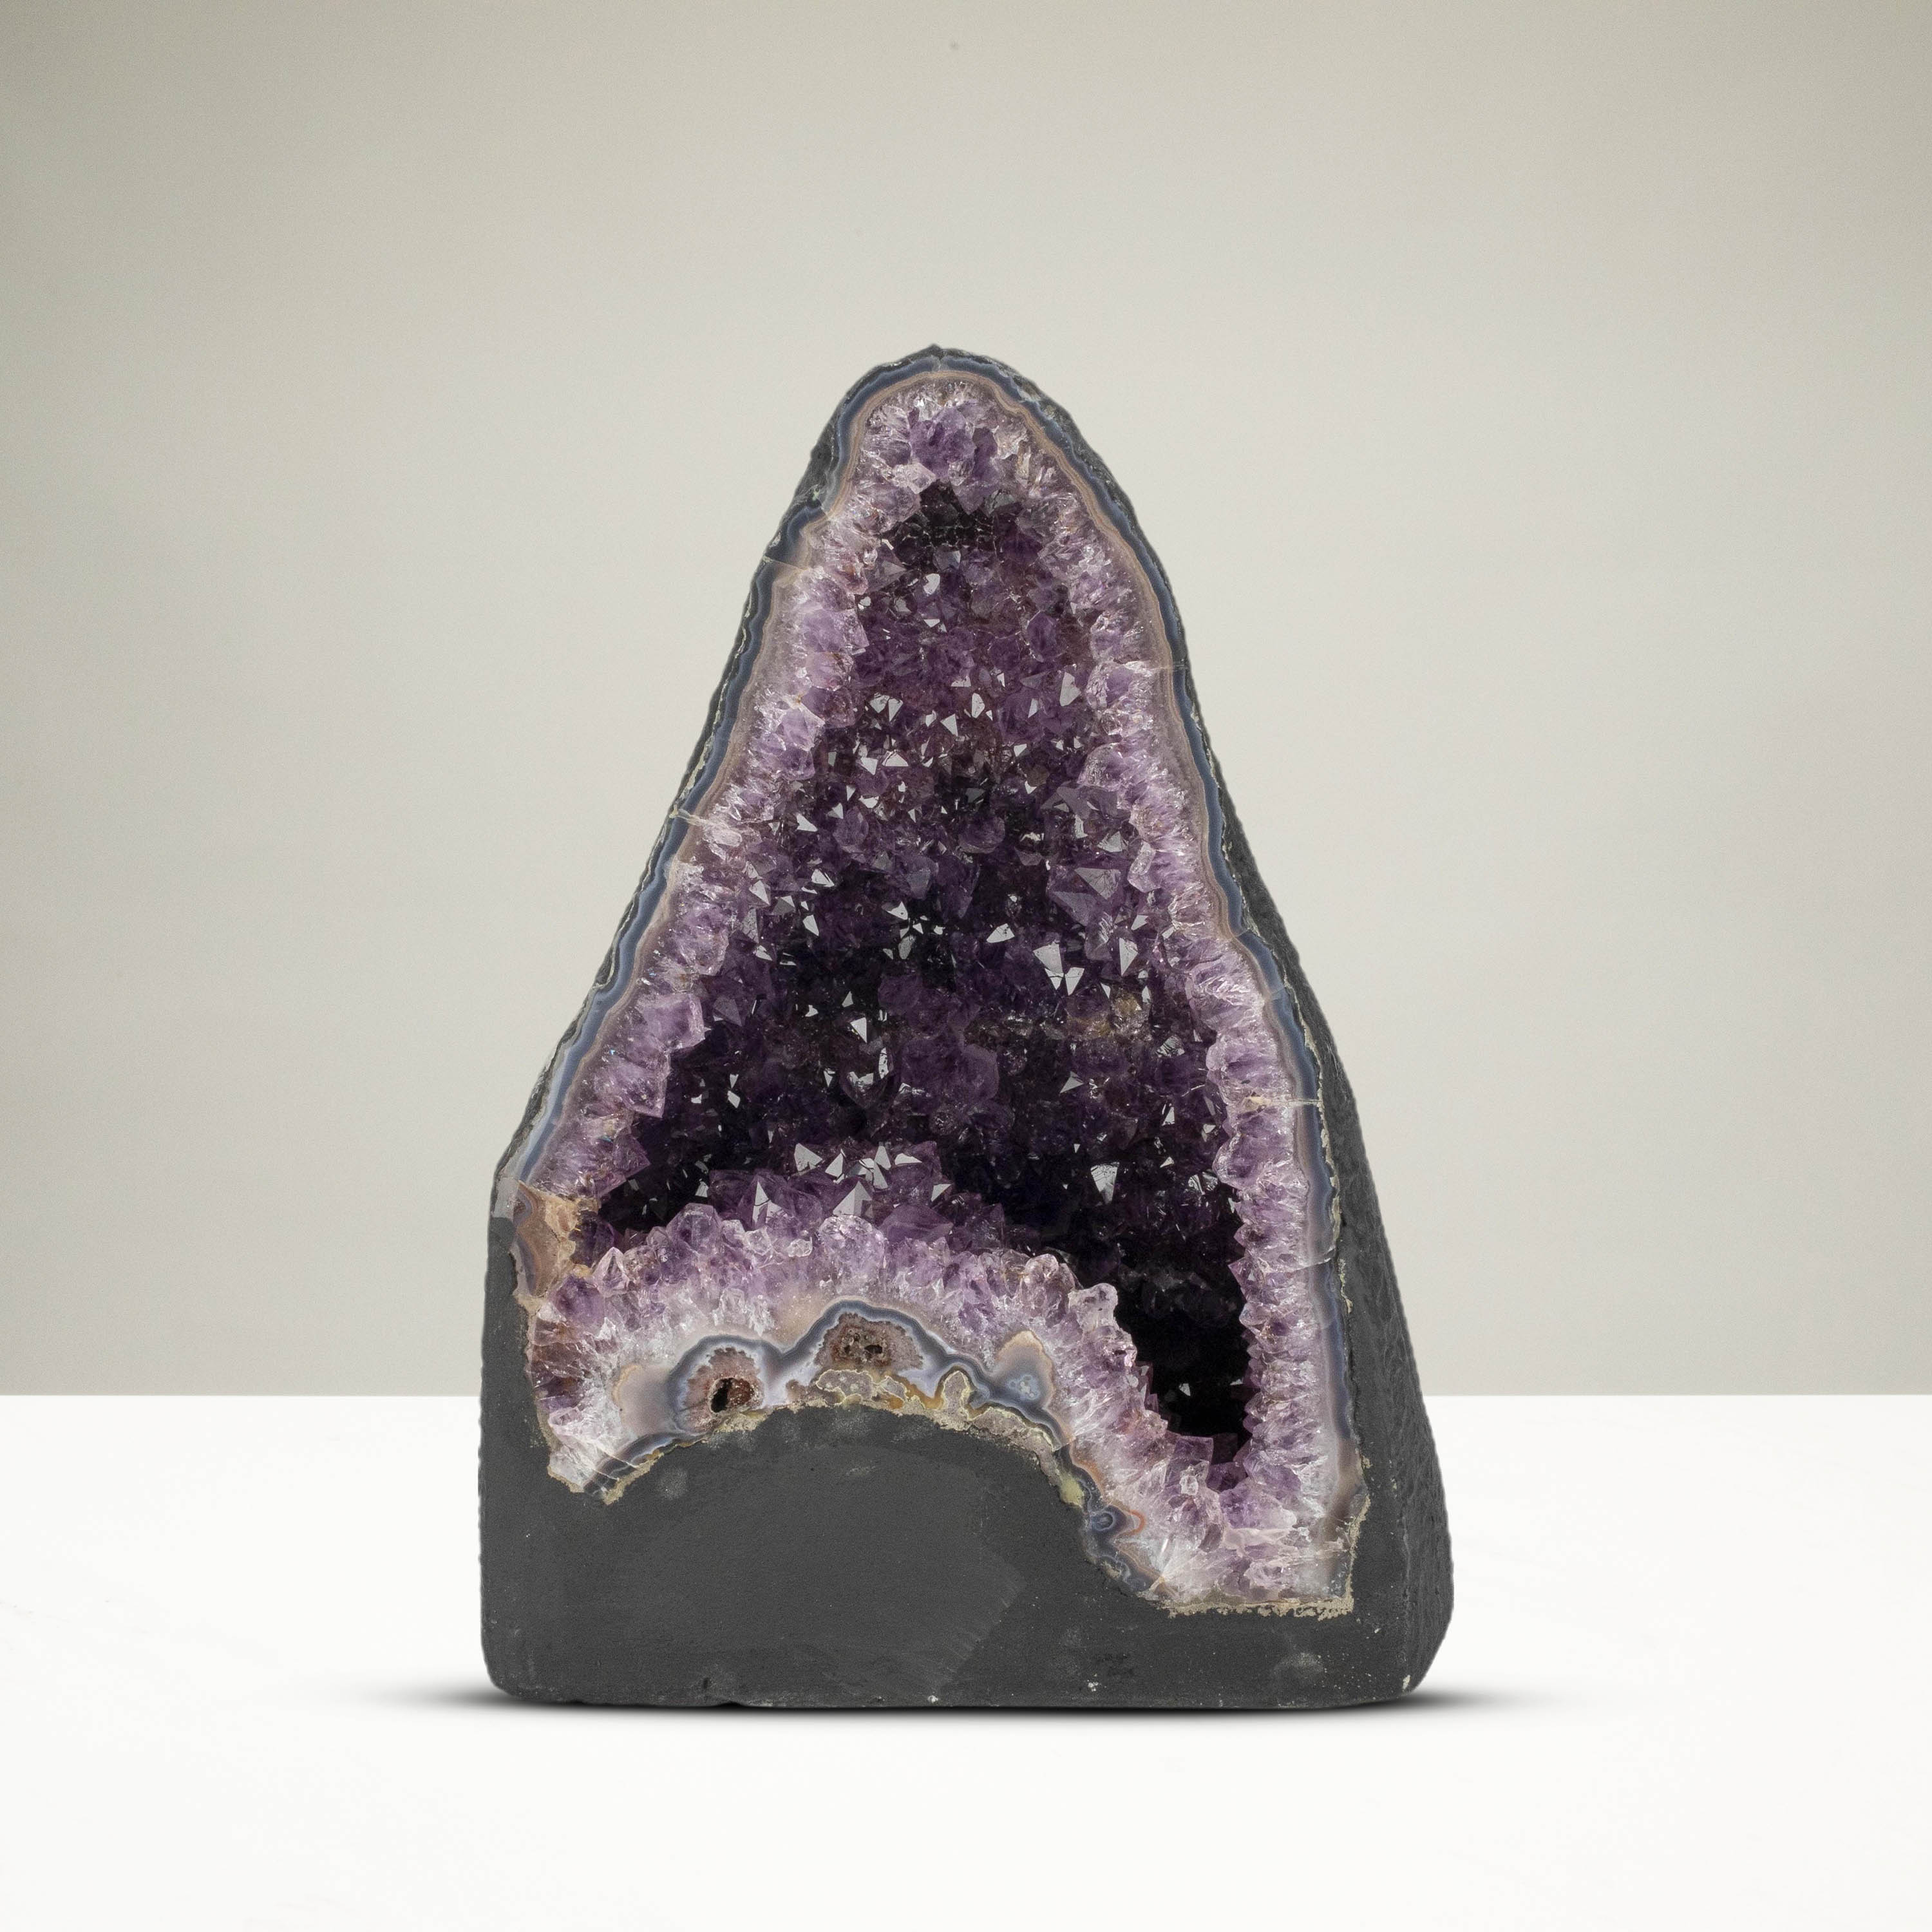 Kalifano Amethyst Amethyst Geode Cathedral - 14" / 40 lbs BAG6400.002